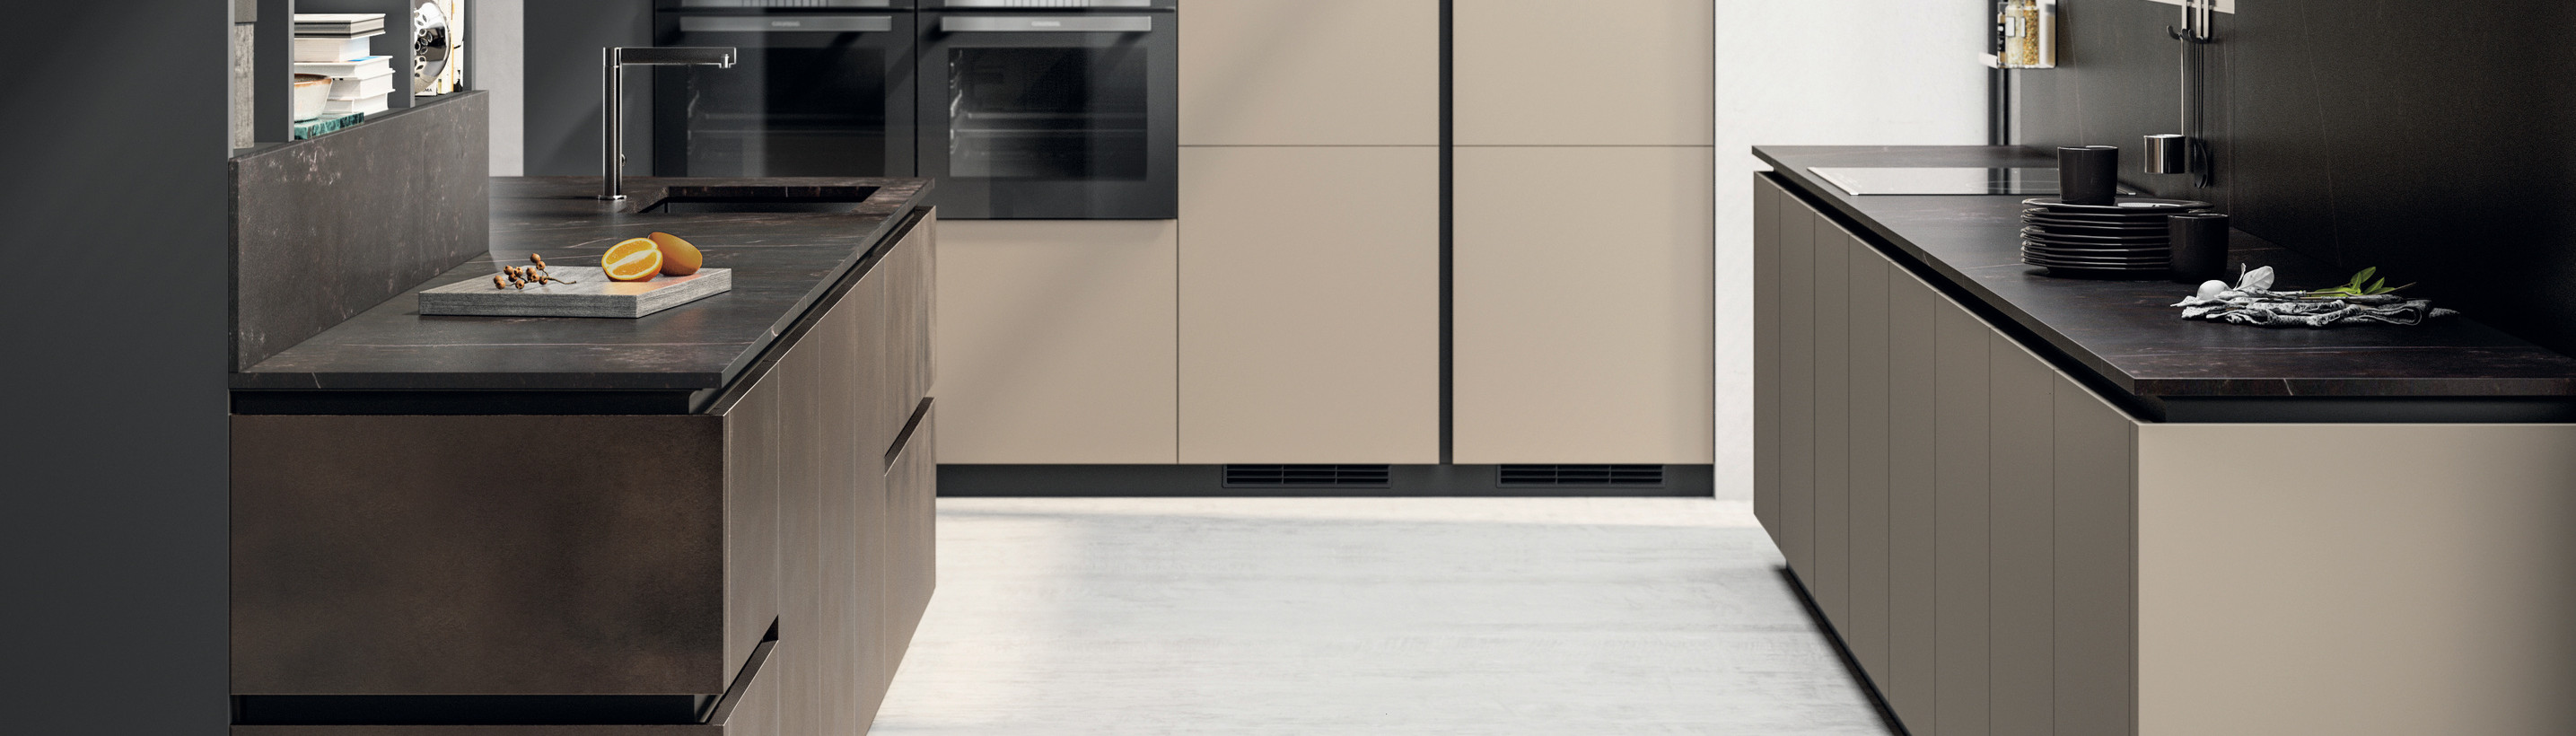 How to Install a Dishwasher Under a Granite Countertop